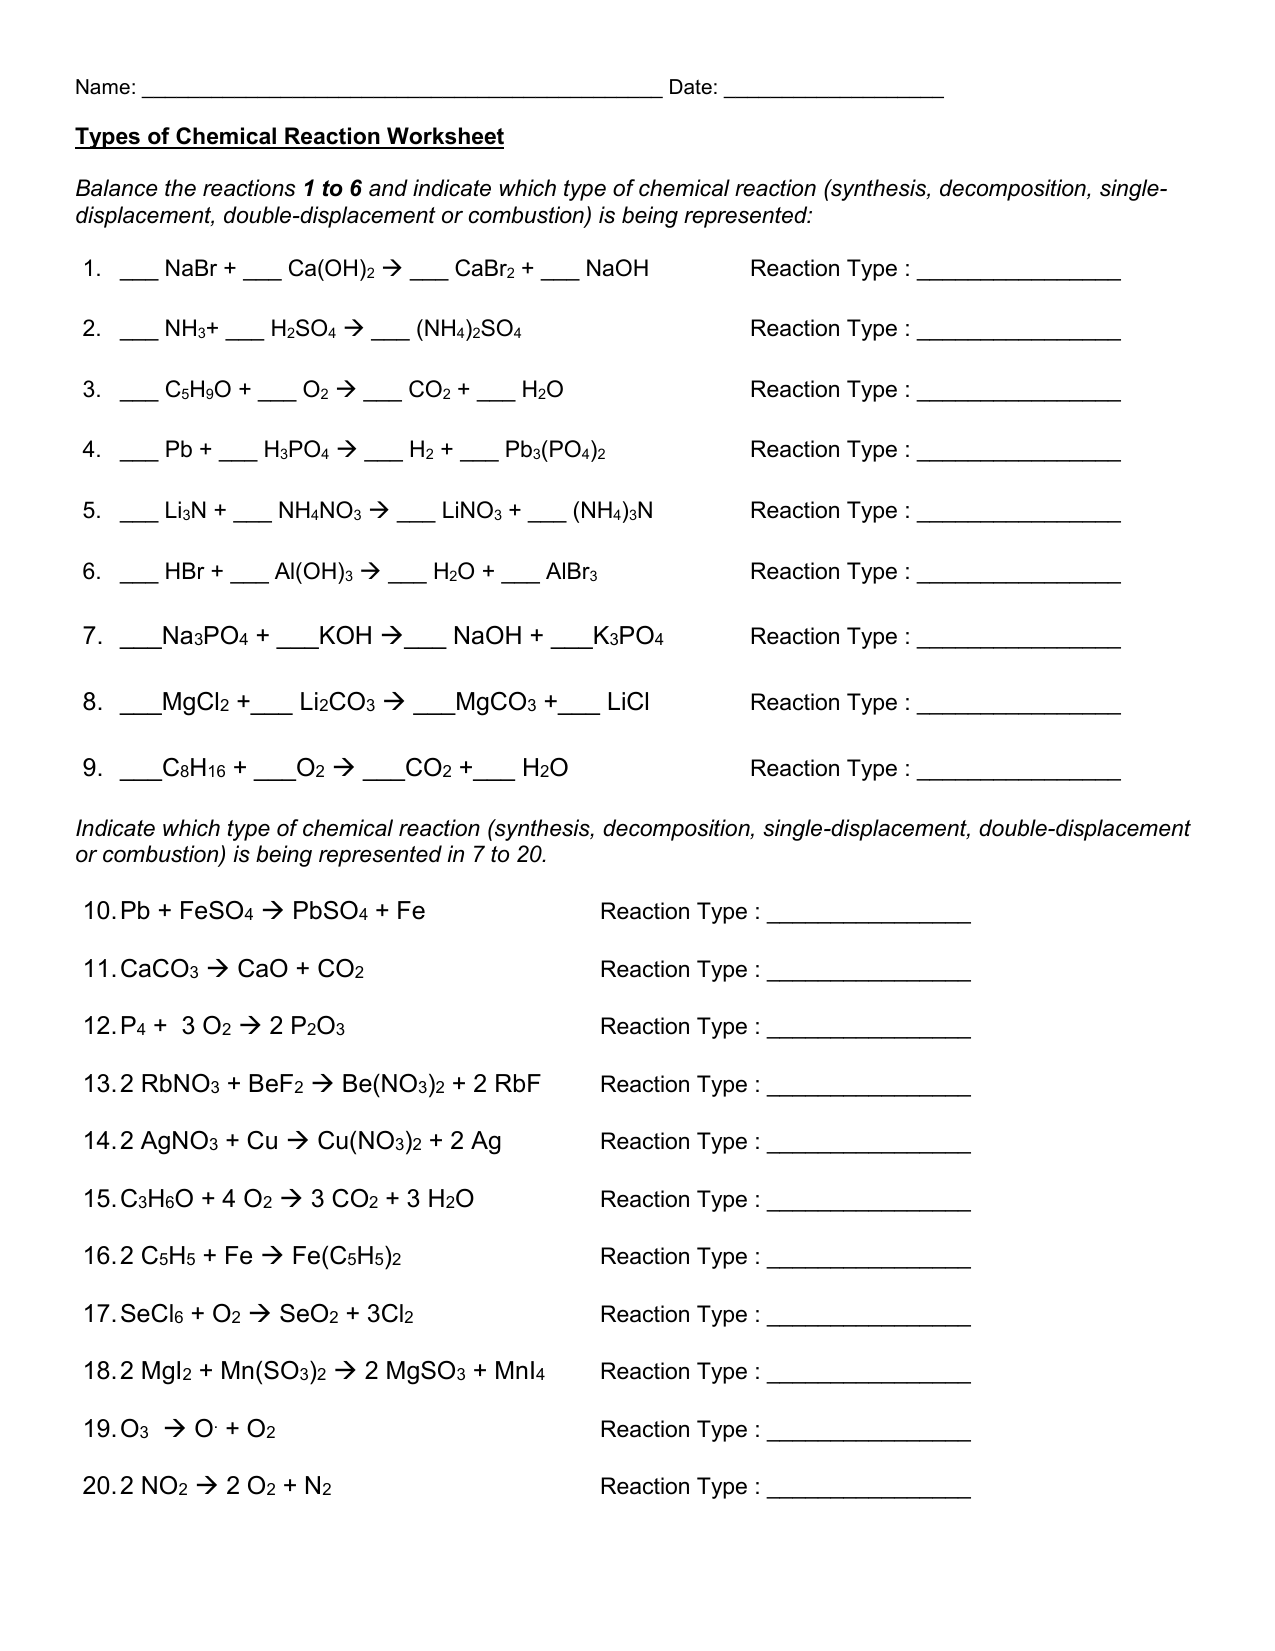 Types of Chemical Reaction Worksheet For Types Of Chemical Reactions Worksheet